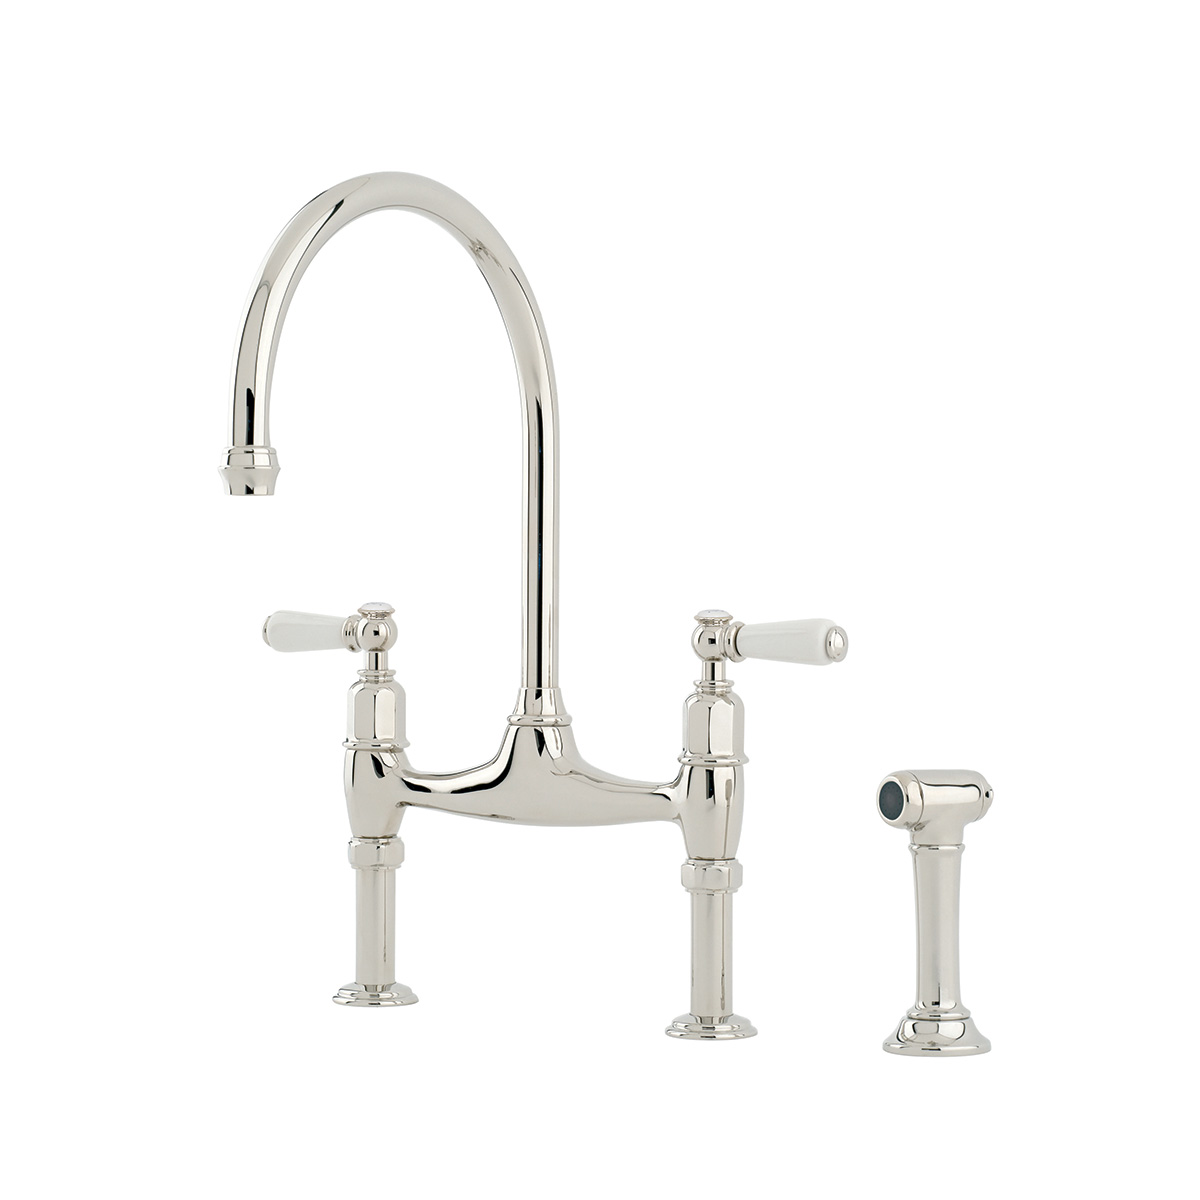 Shaws by Perrin & Rowe Pendleton bridge mixer with spray rinse in nickel. Ionian style kitchen tap with straight unions AUSH.4173. Distributed in Australia by Luxe by Design, Brisbane.